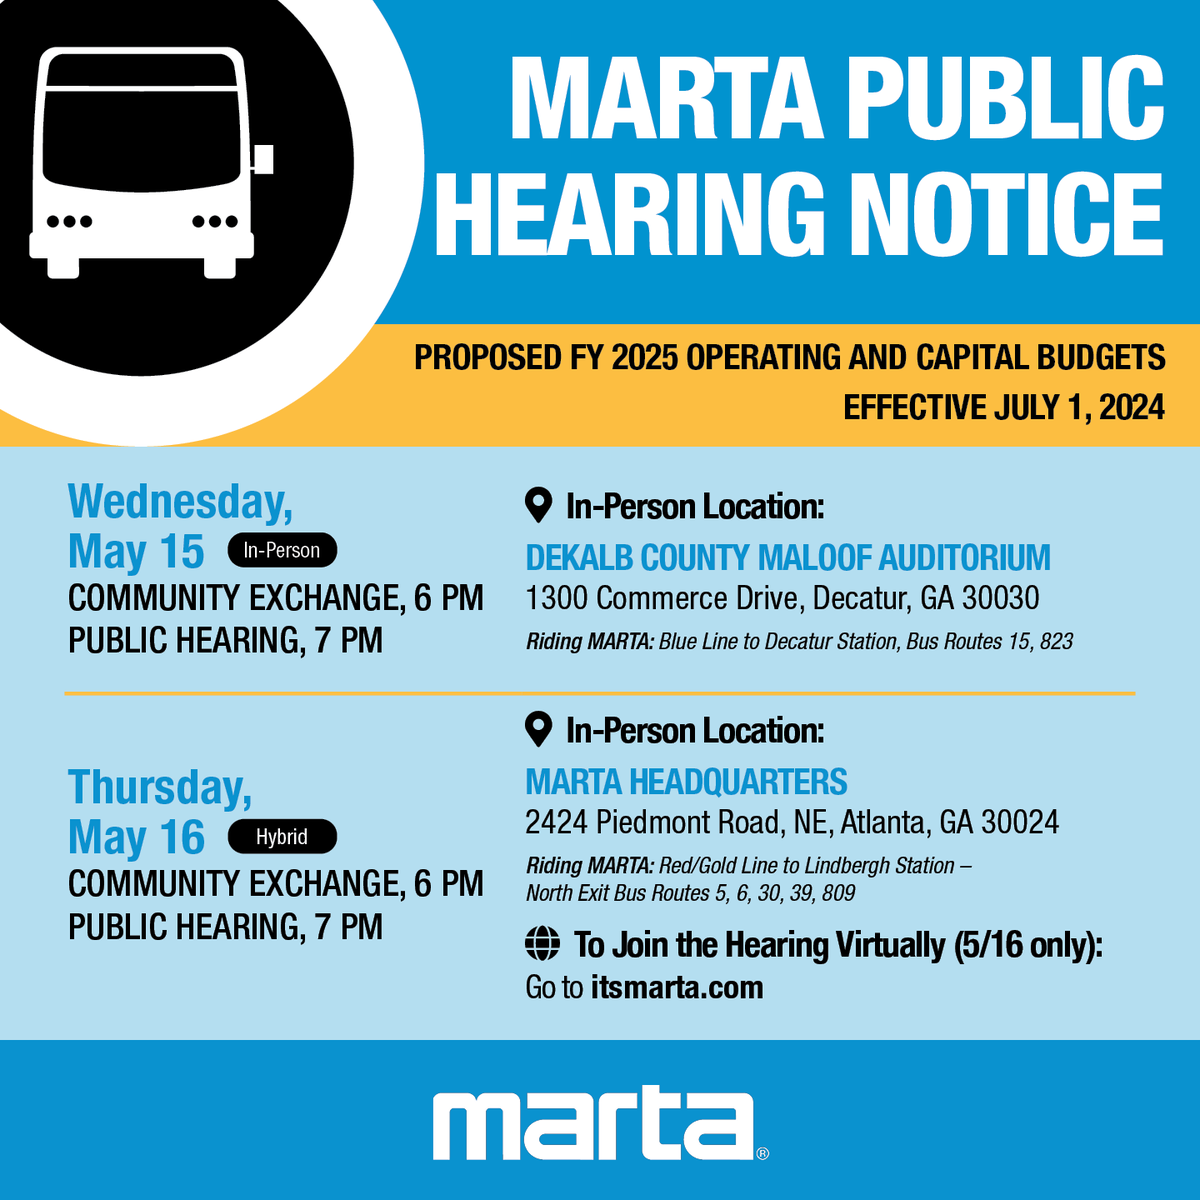 MARTA Board of Directors will hold in-person and virtual public hearings to consider the proposed fiscal year 2025 Operating and Capital Budgets on Wed., 5/15 at 7 p.m. and Thurs., 5/16 at 7 p.m., with a community exchange session beginning one hour earlier. Learn more:…